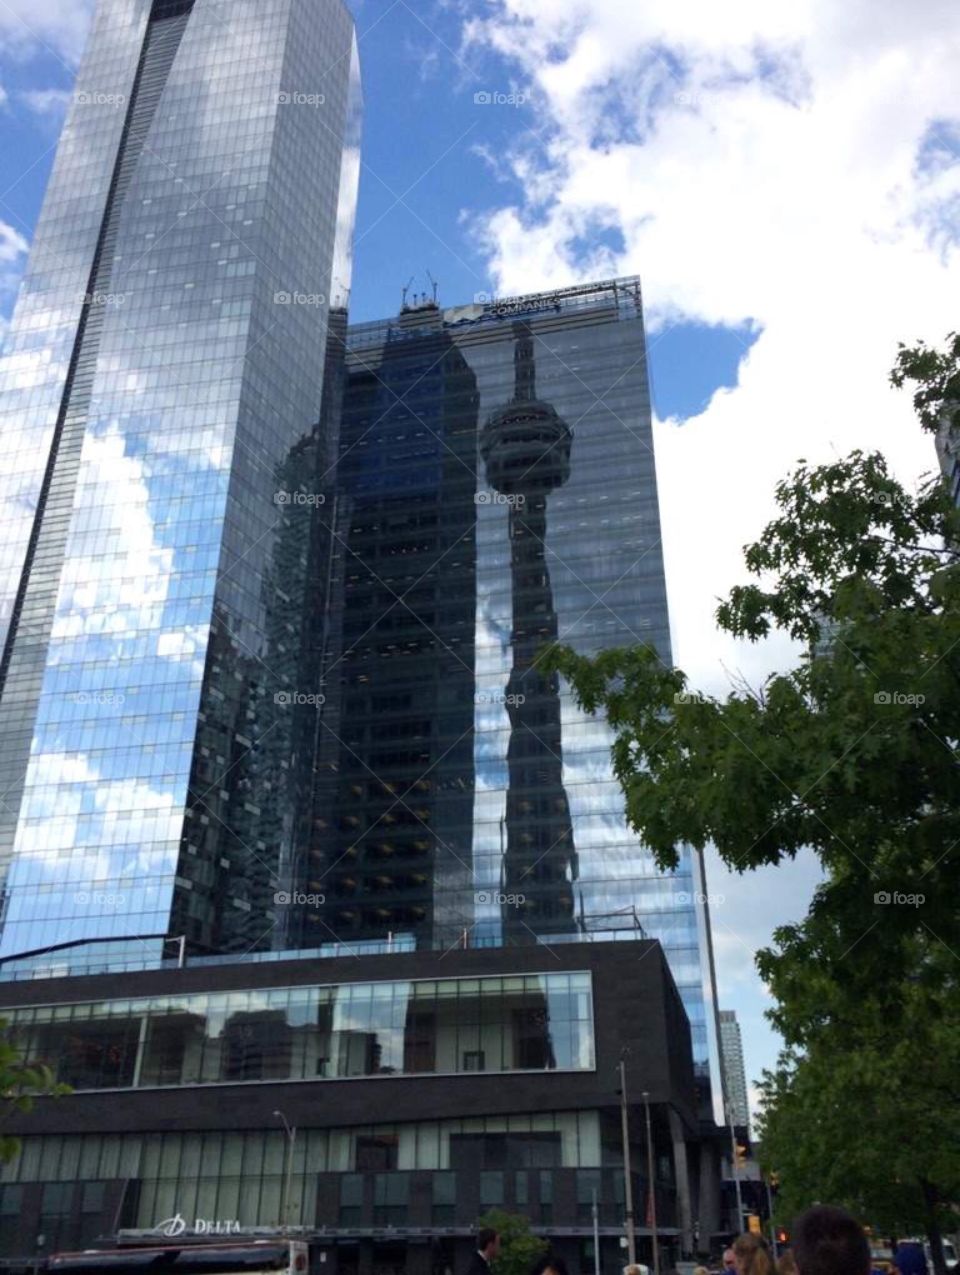 The reflect of the CN Tower 